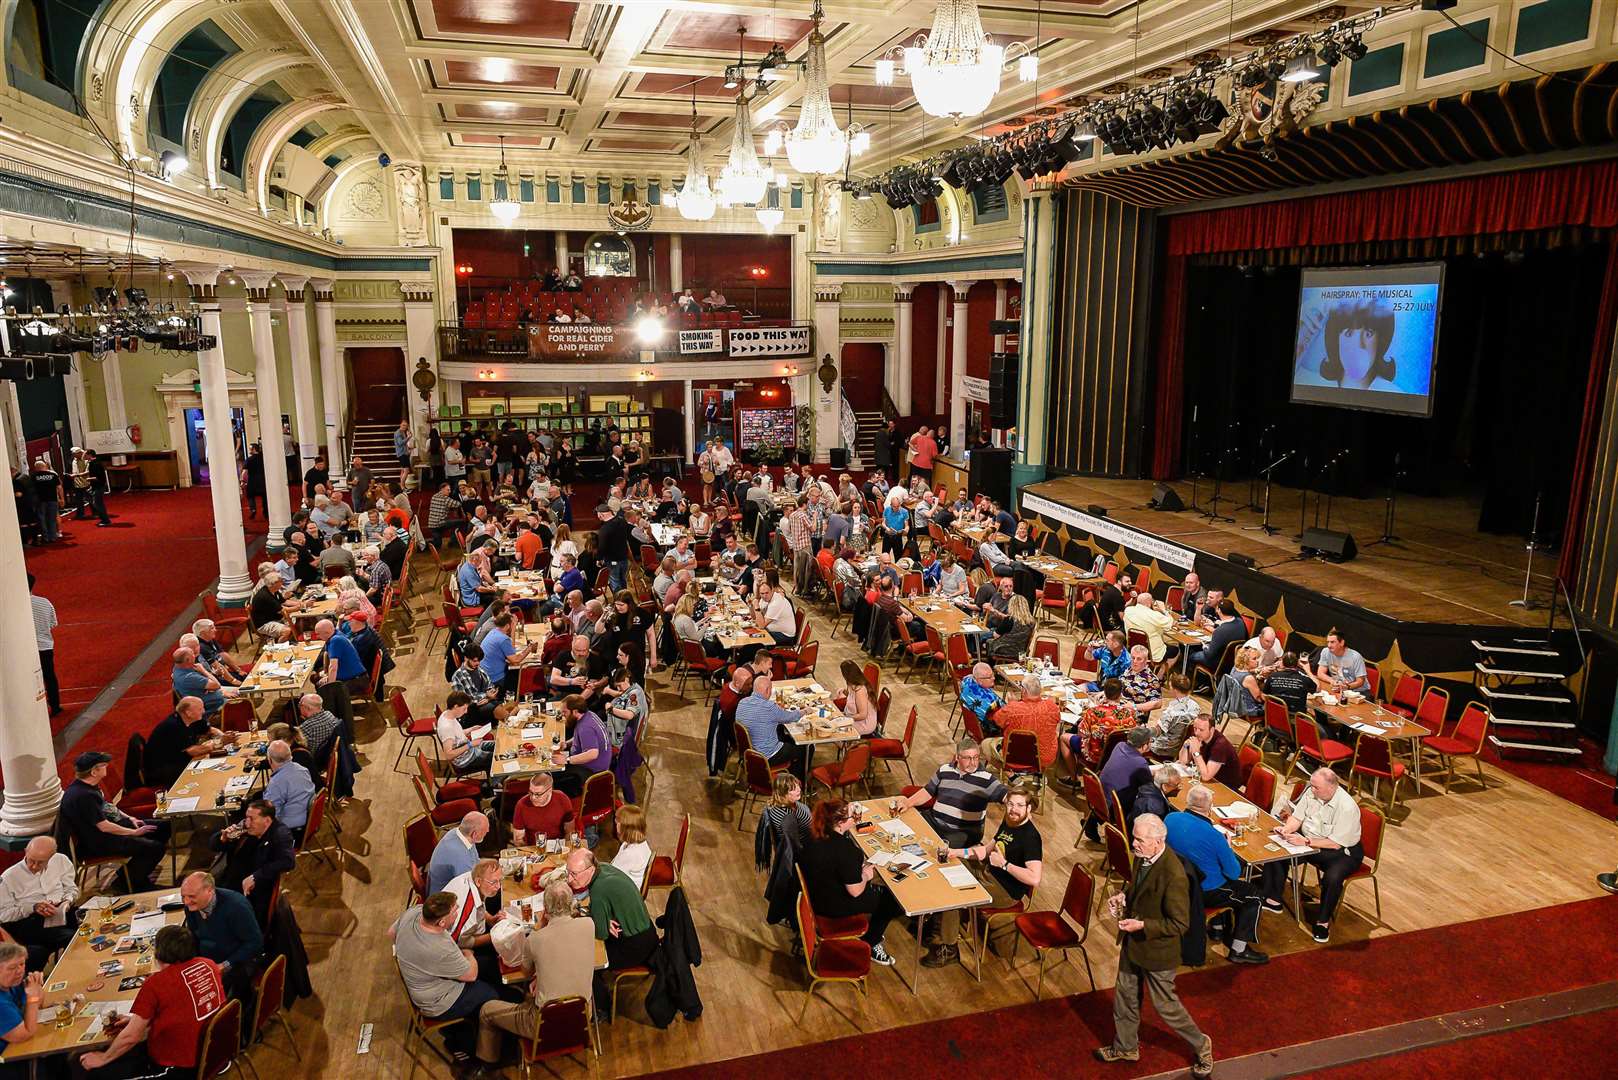 The Winter Gardens has played host to everything from big-name concerts to beer festivals and school performances over the years. Picture: Alan Langley